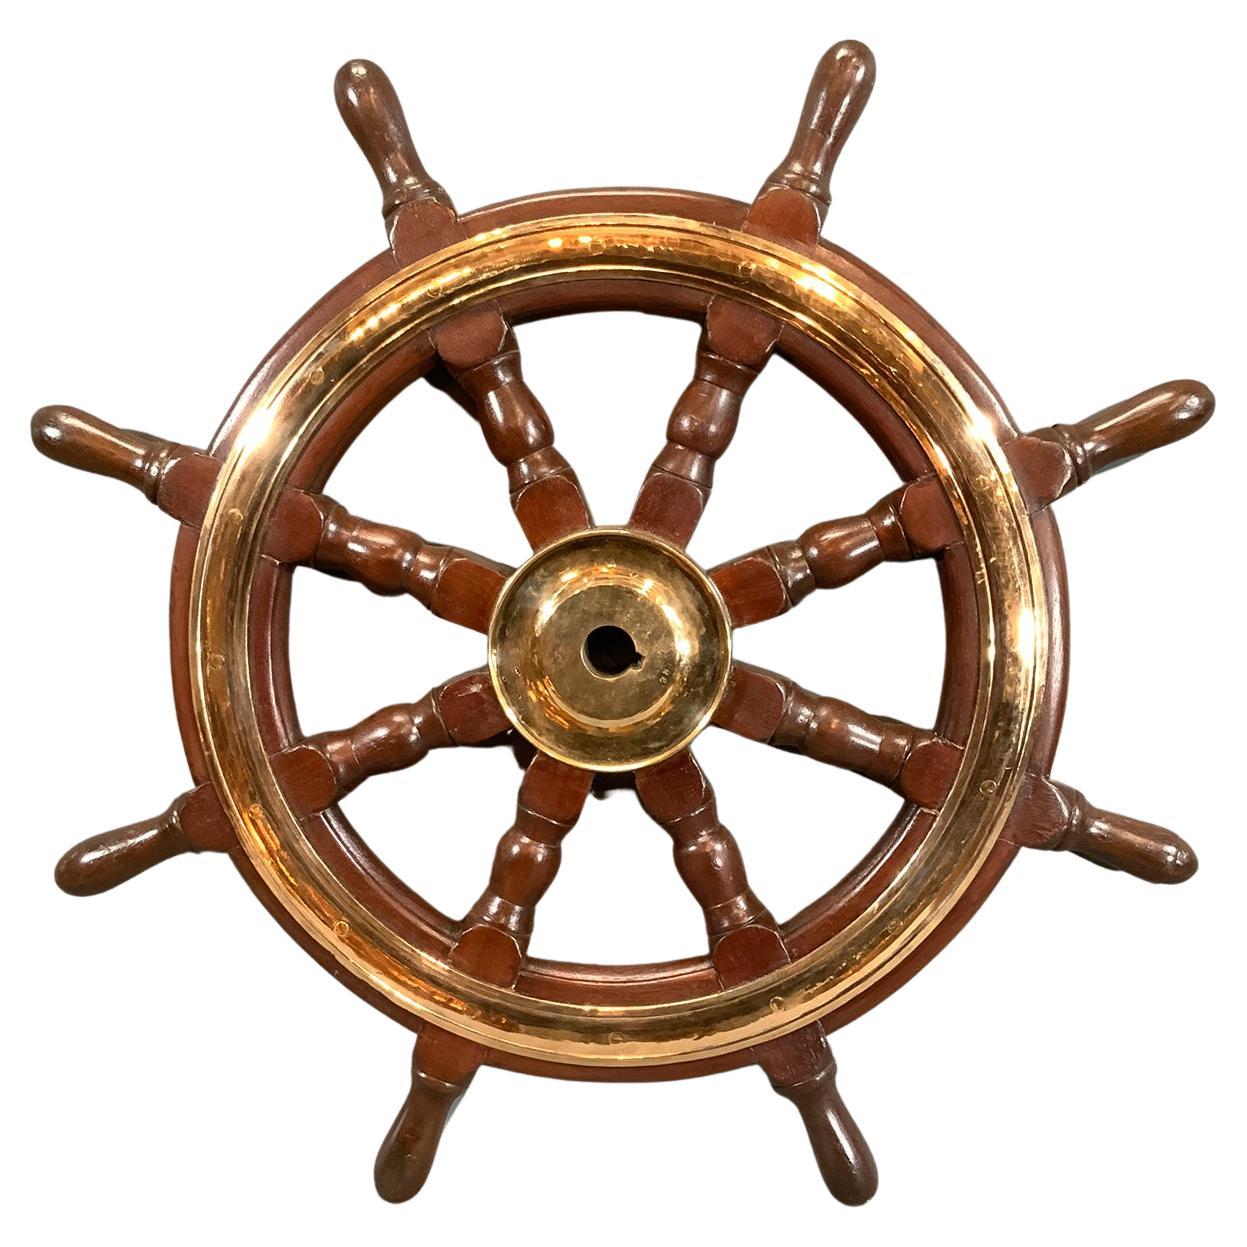 Eight Spoke Ships Wheel with Solid Brass